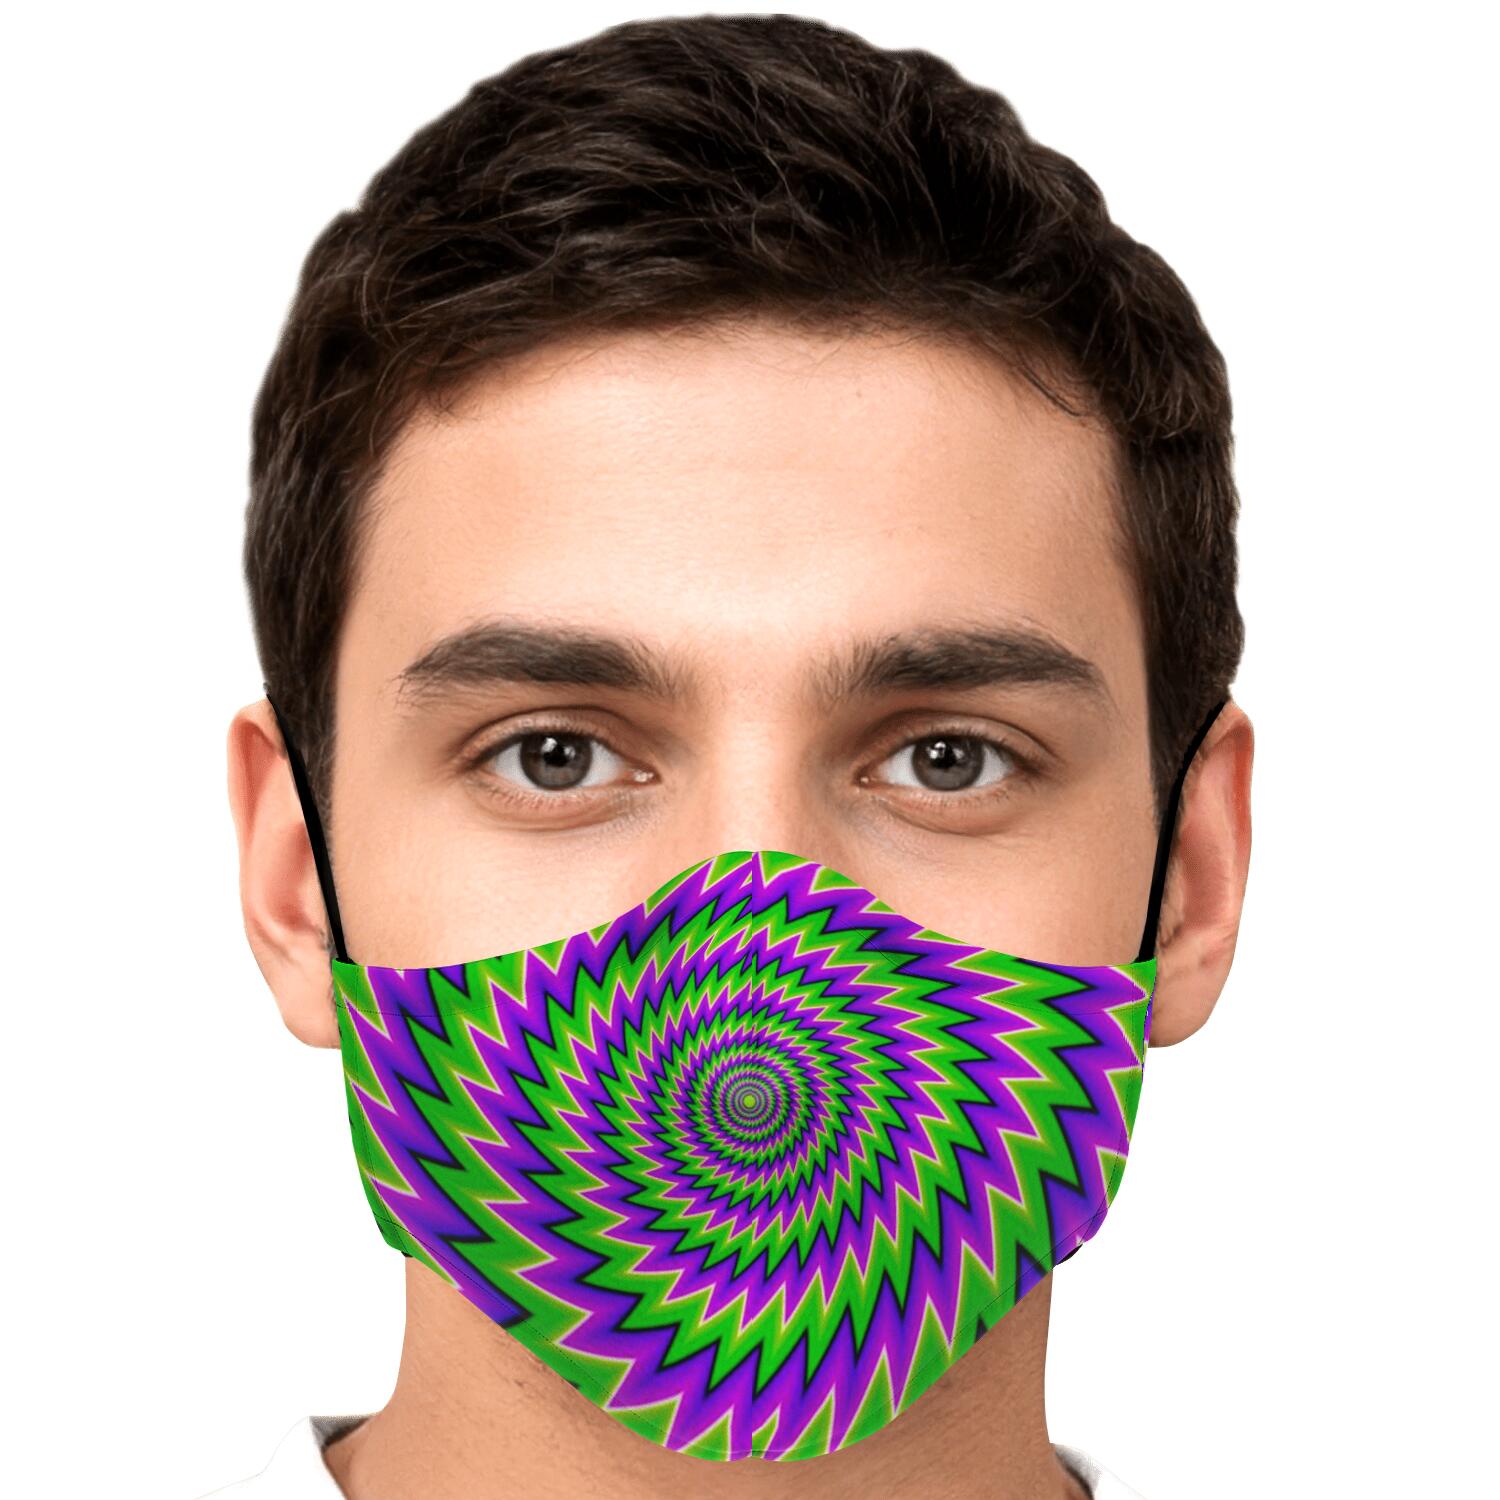 Green Spiral Moving Optical Illusion Face Mask